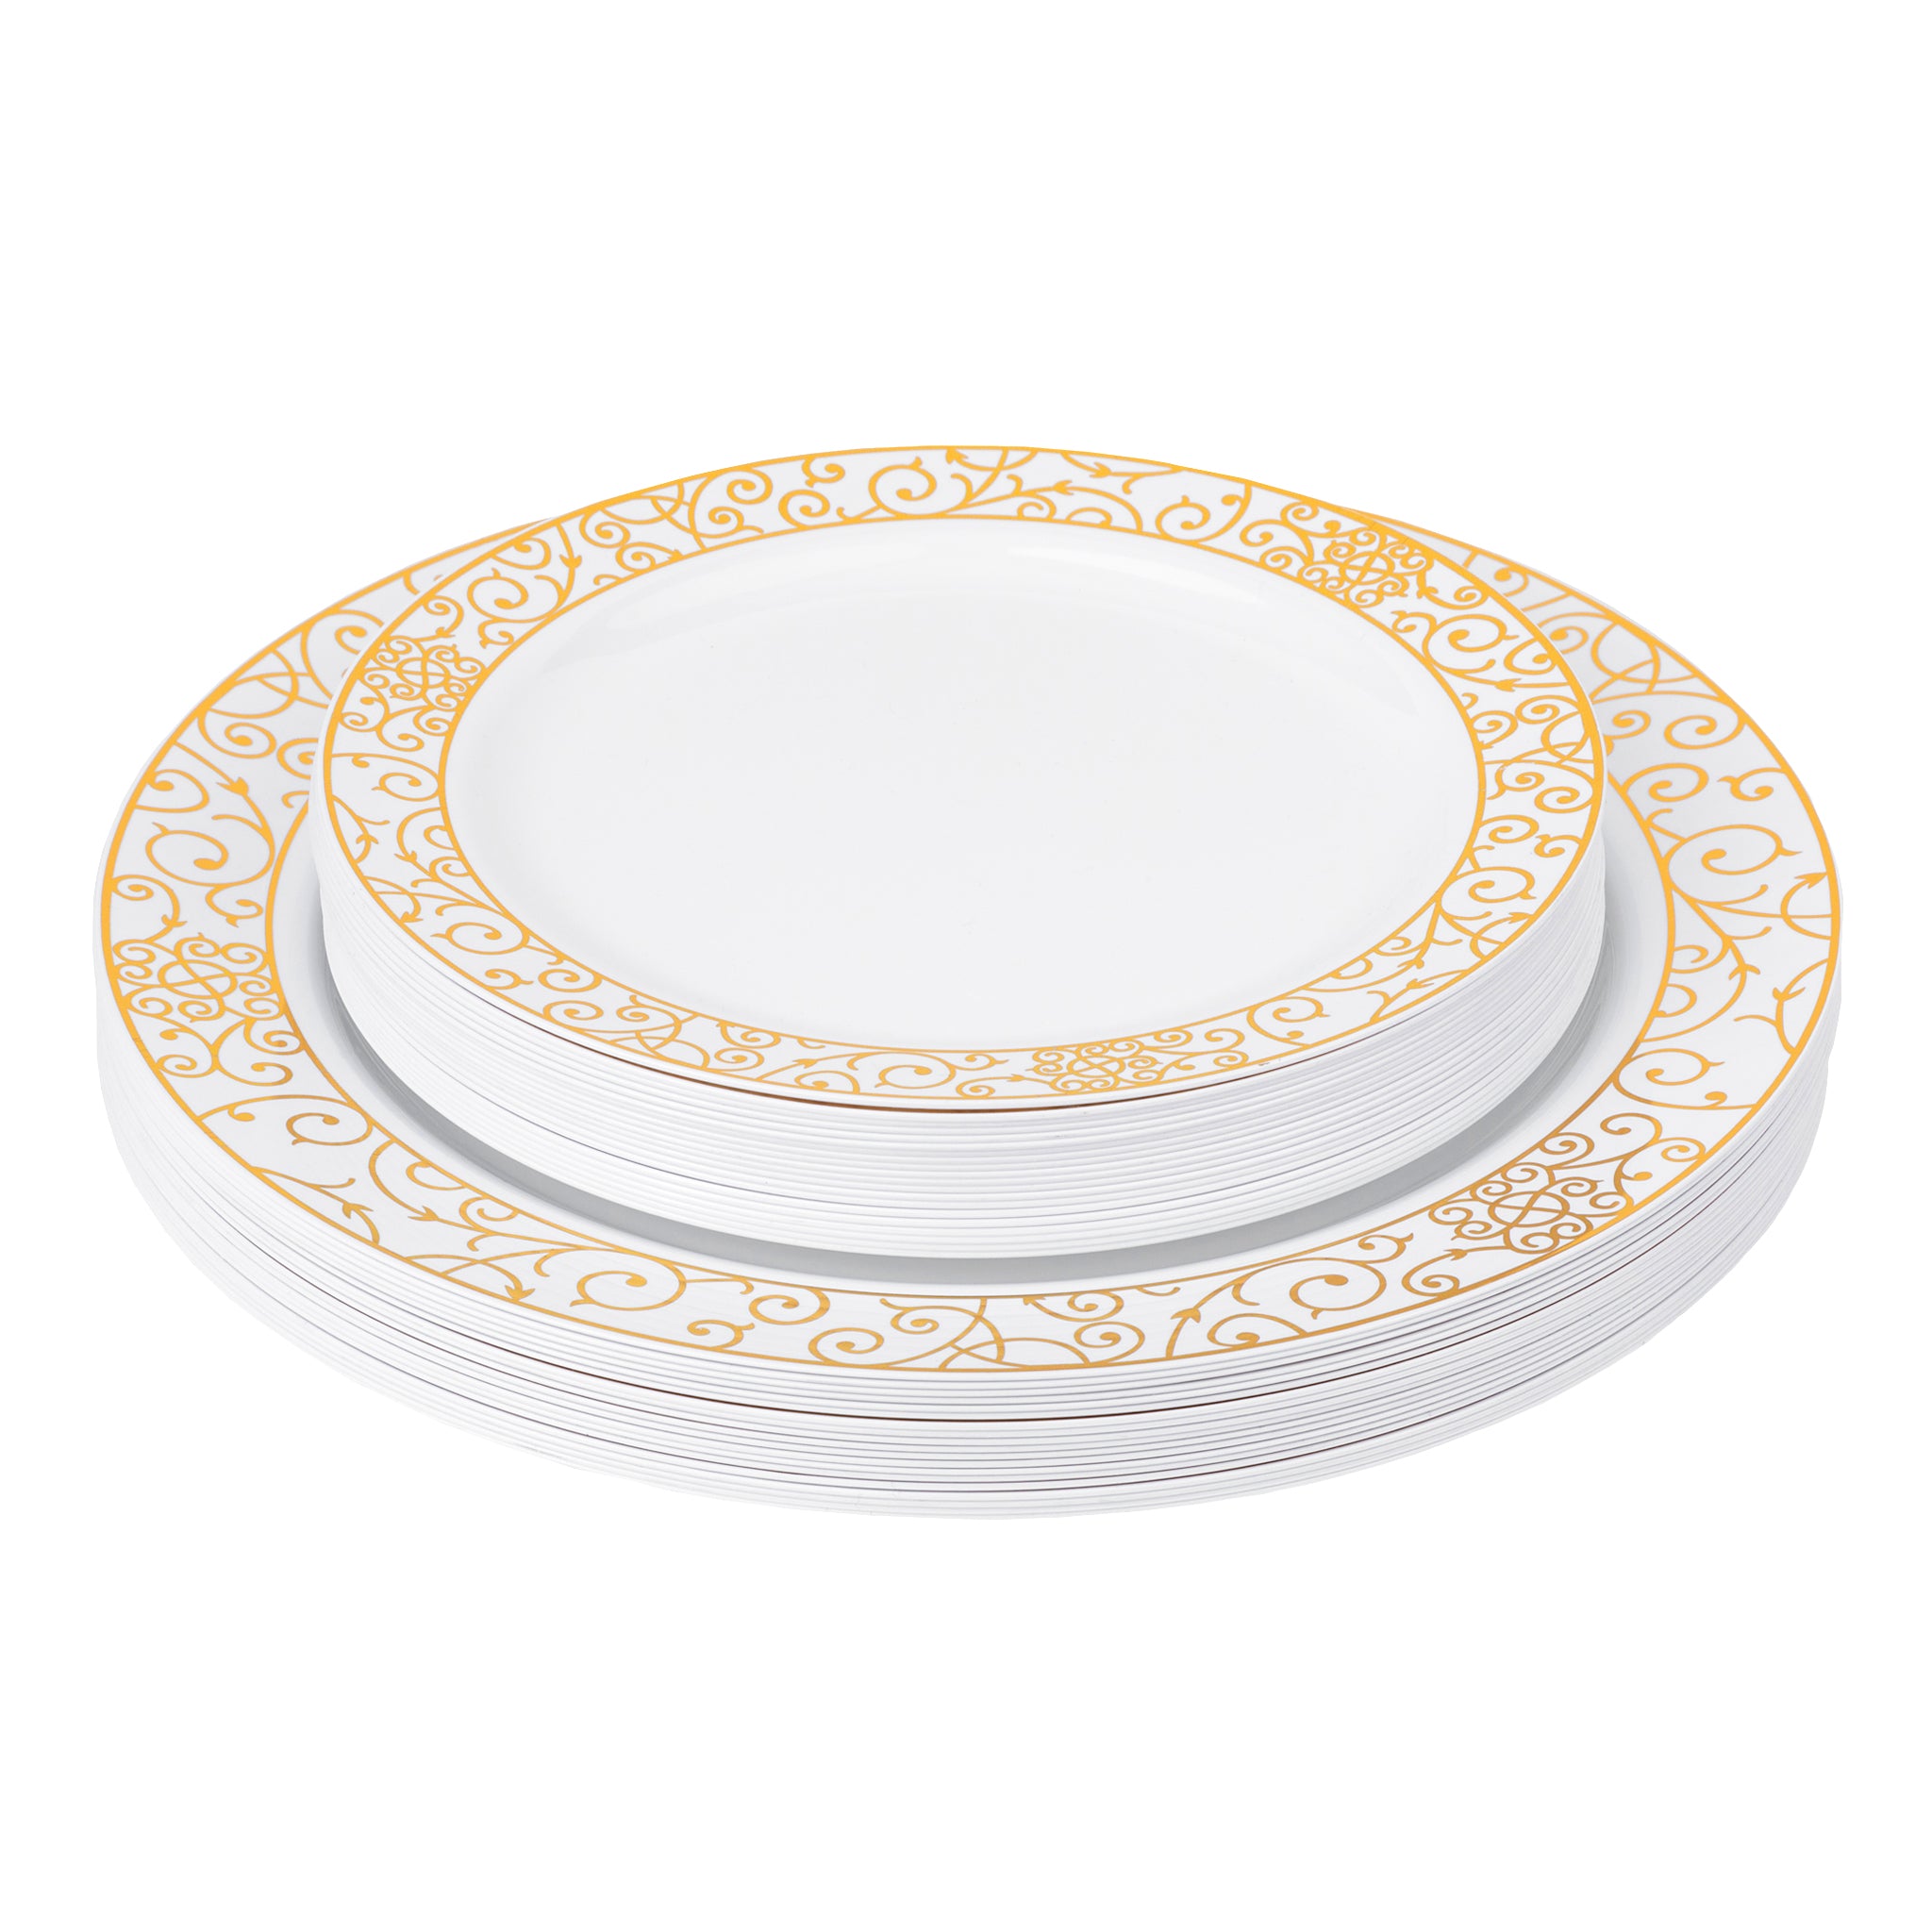 20 Pack Set White Gold Floral Design Plastic Party Plates, Disposable Round  Dinner and Dessert Plates 10 / 7 in 2023